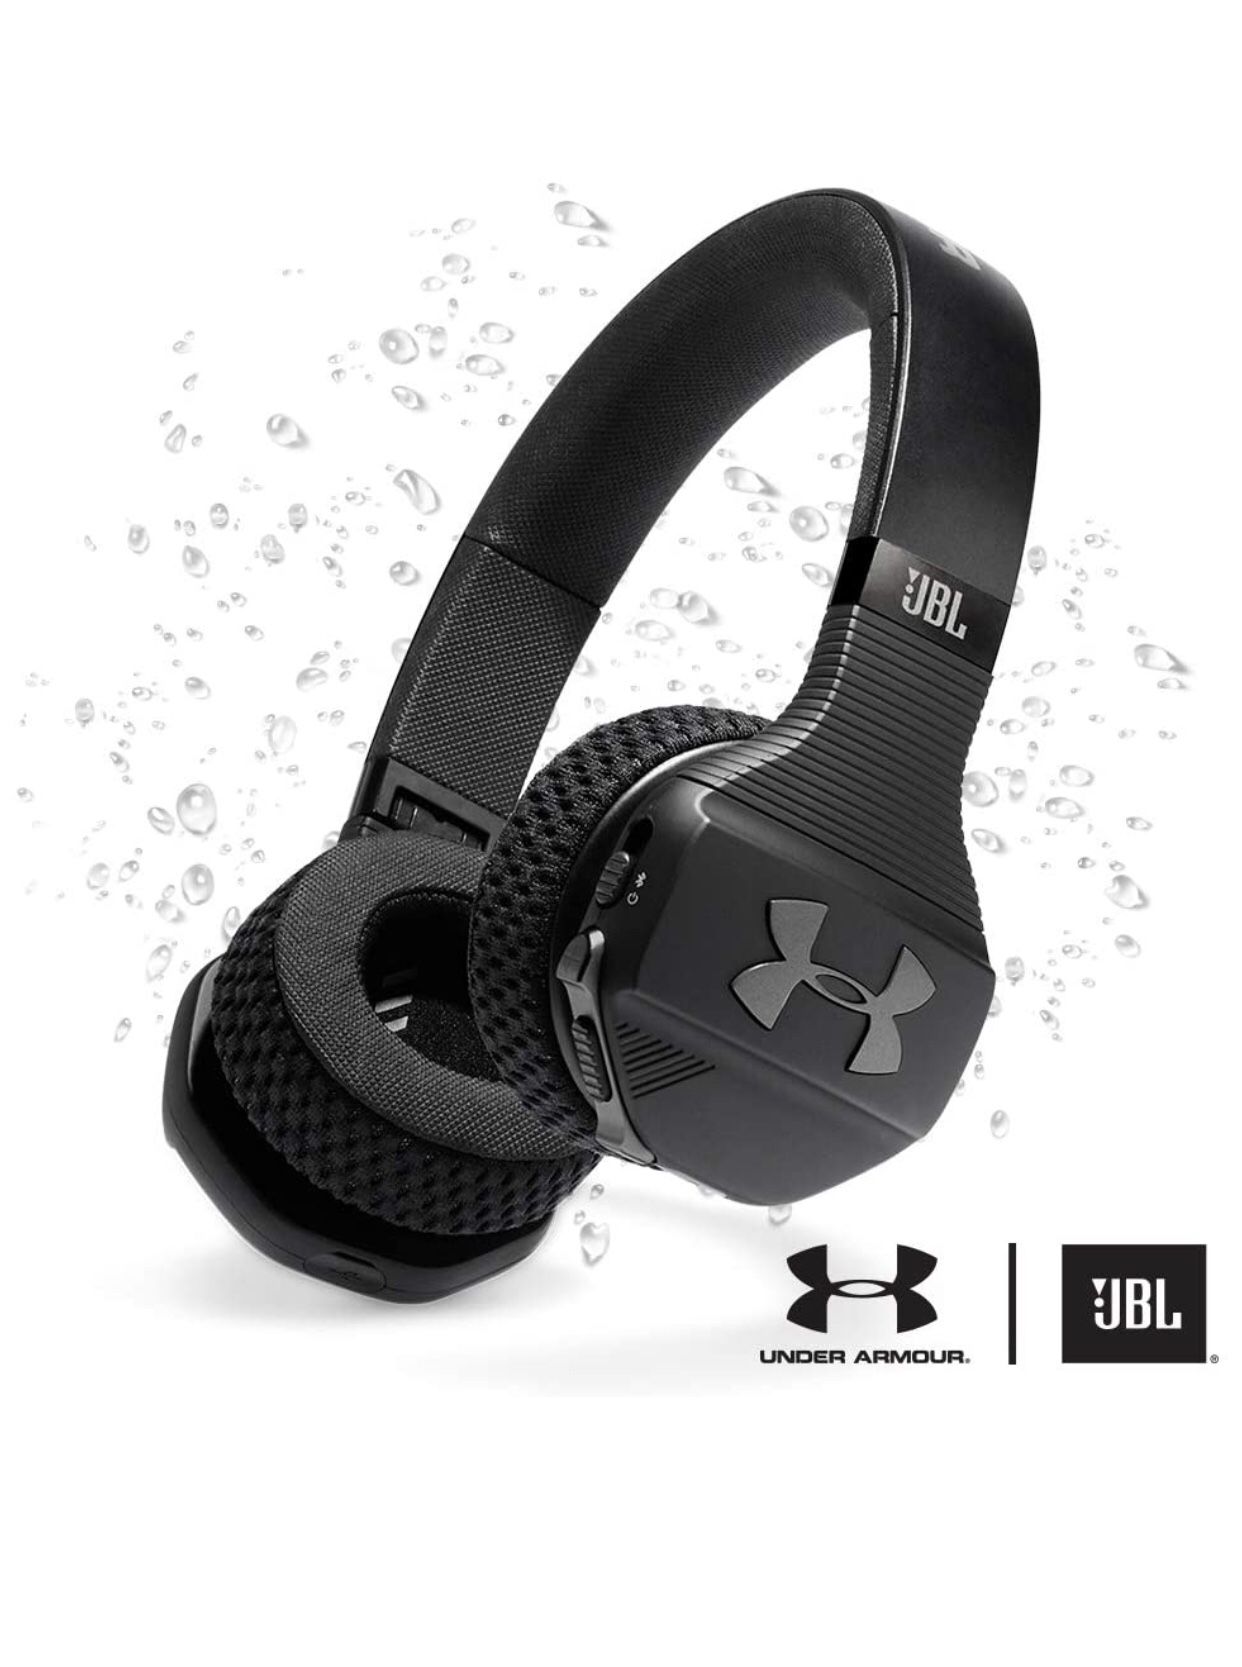 JBL Under Armour Sport Wireless Train – On-Ear Bluetooth Headphones with Microphone made for Sport. Wireless Headset with IPX4 Sweatproof, works with